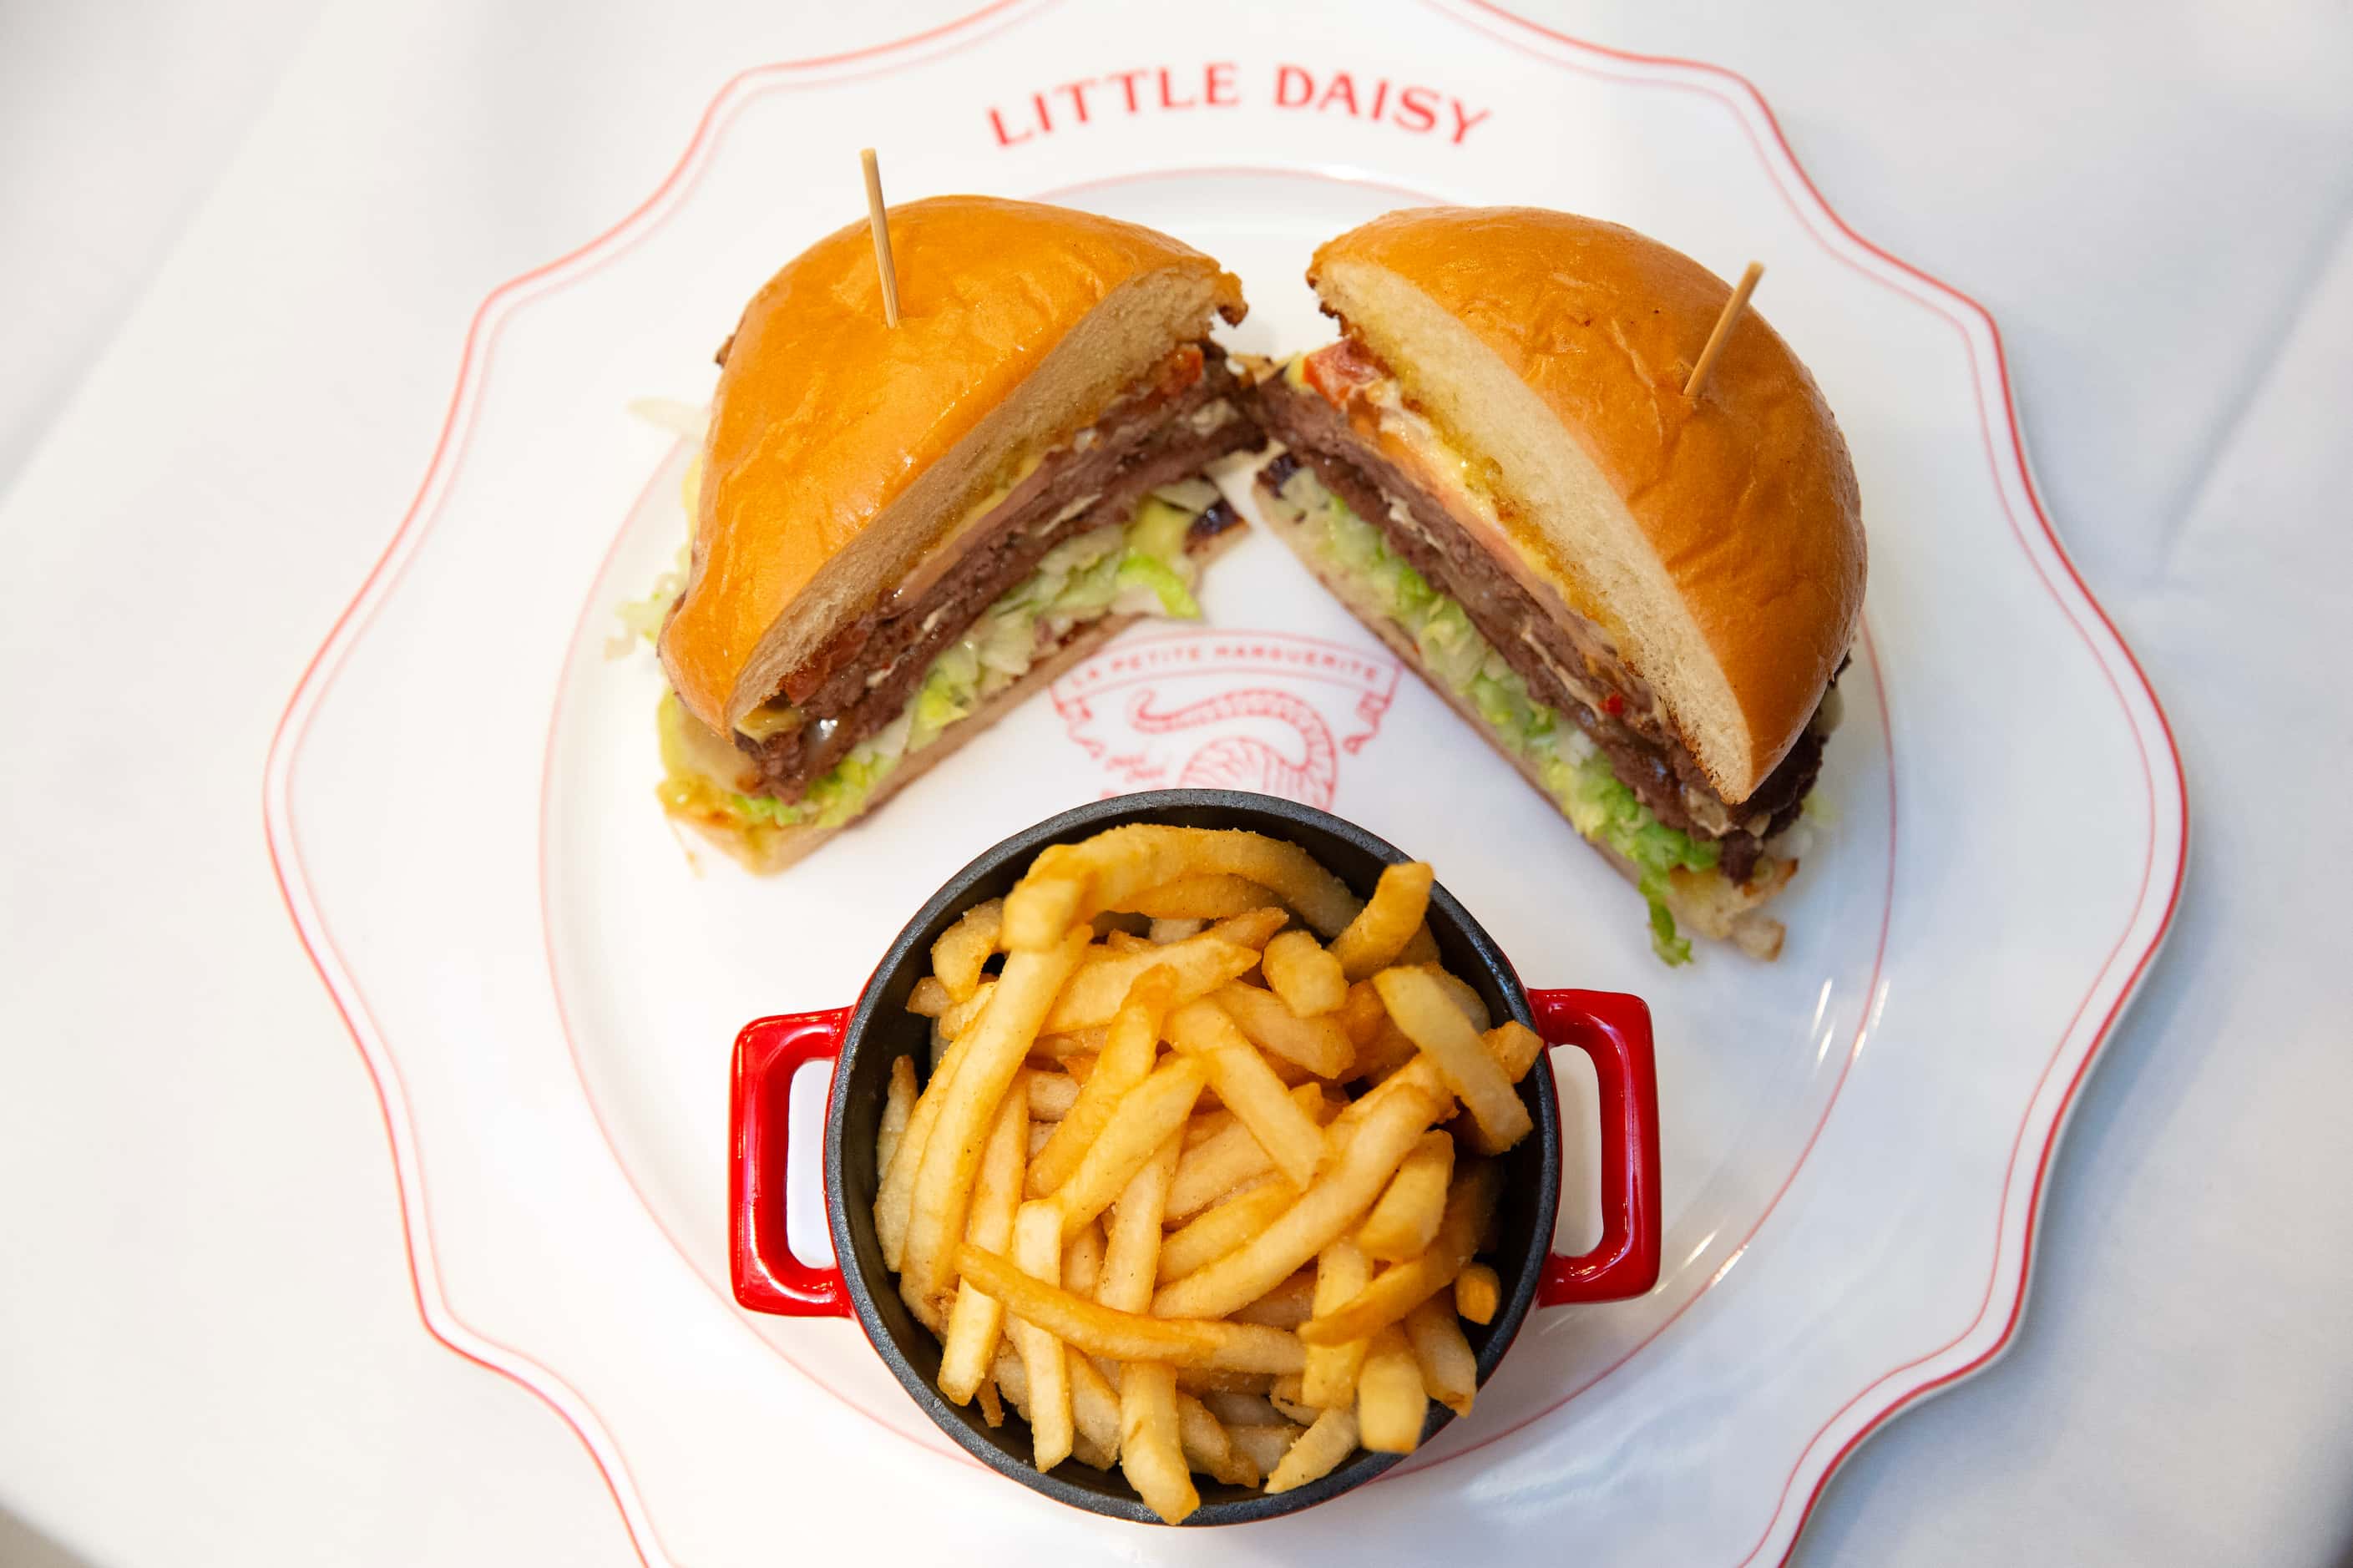 Little Daisy features a Hemingway burger with India relish rouille, Camembert, lettuce,...